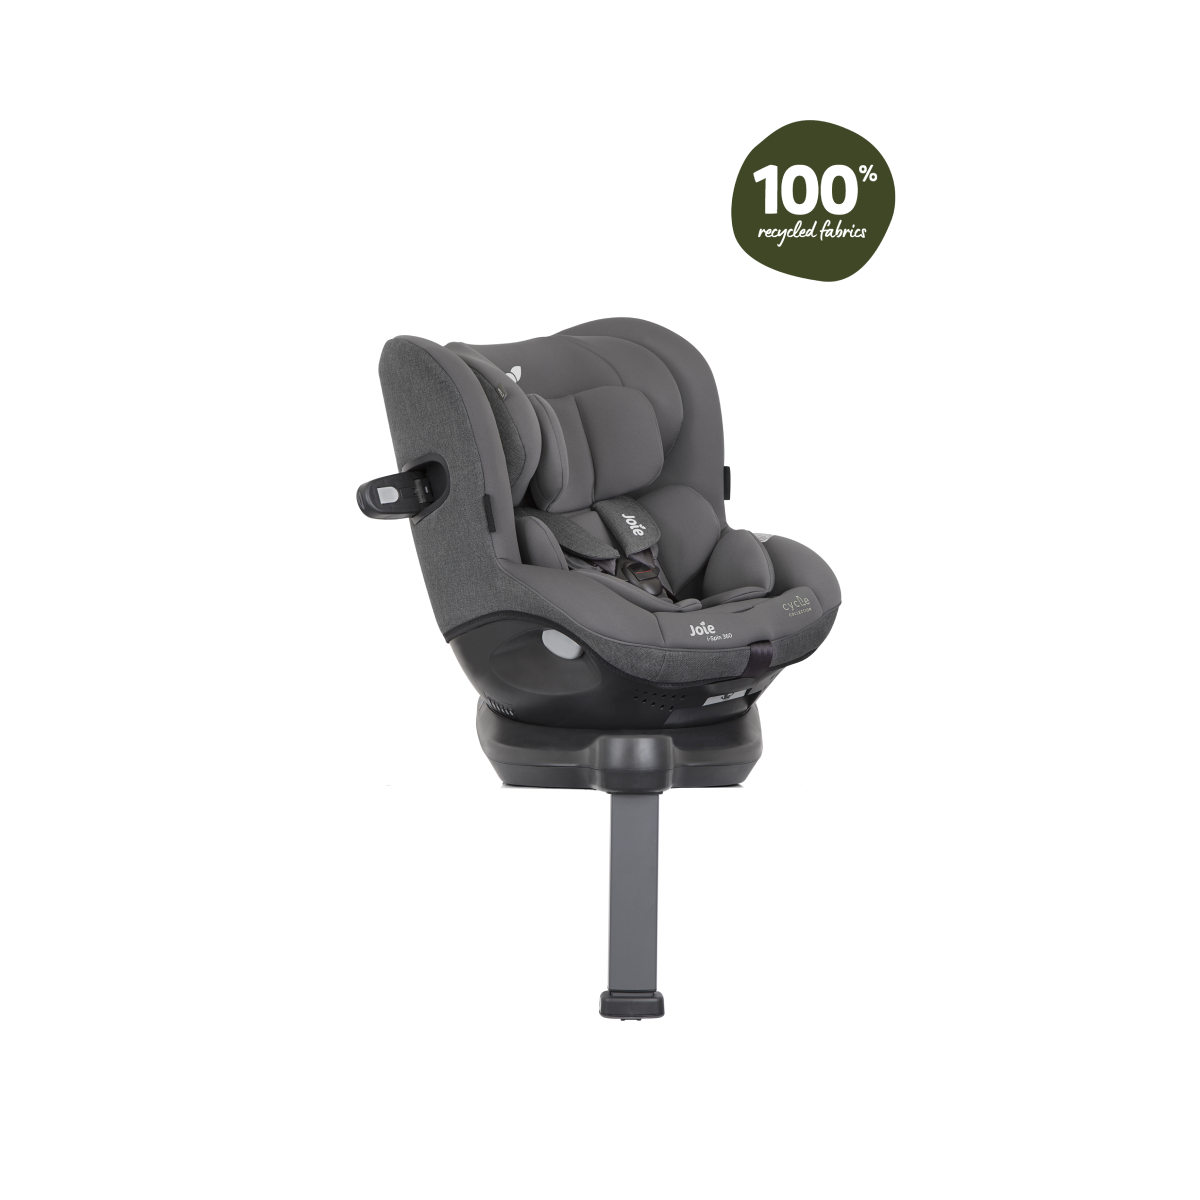 Joie i-Spin 360 Cycle 0+/1 Car Seat